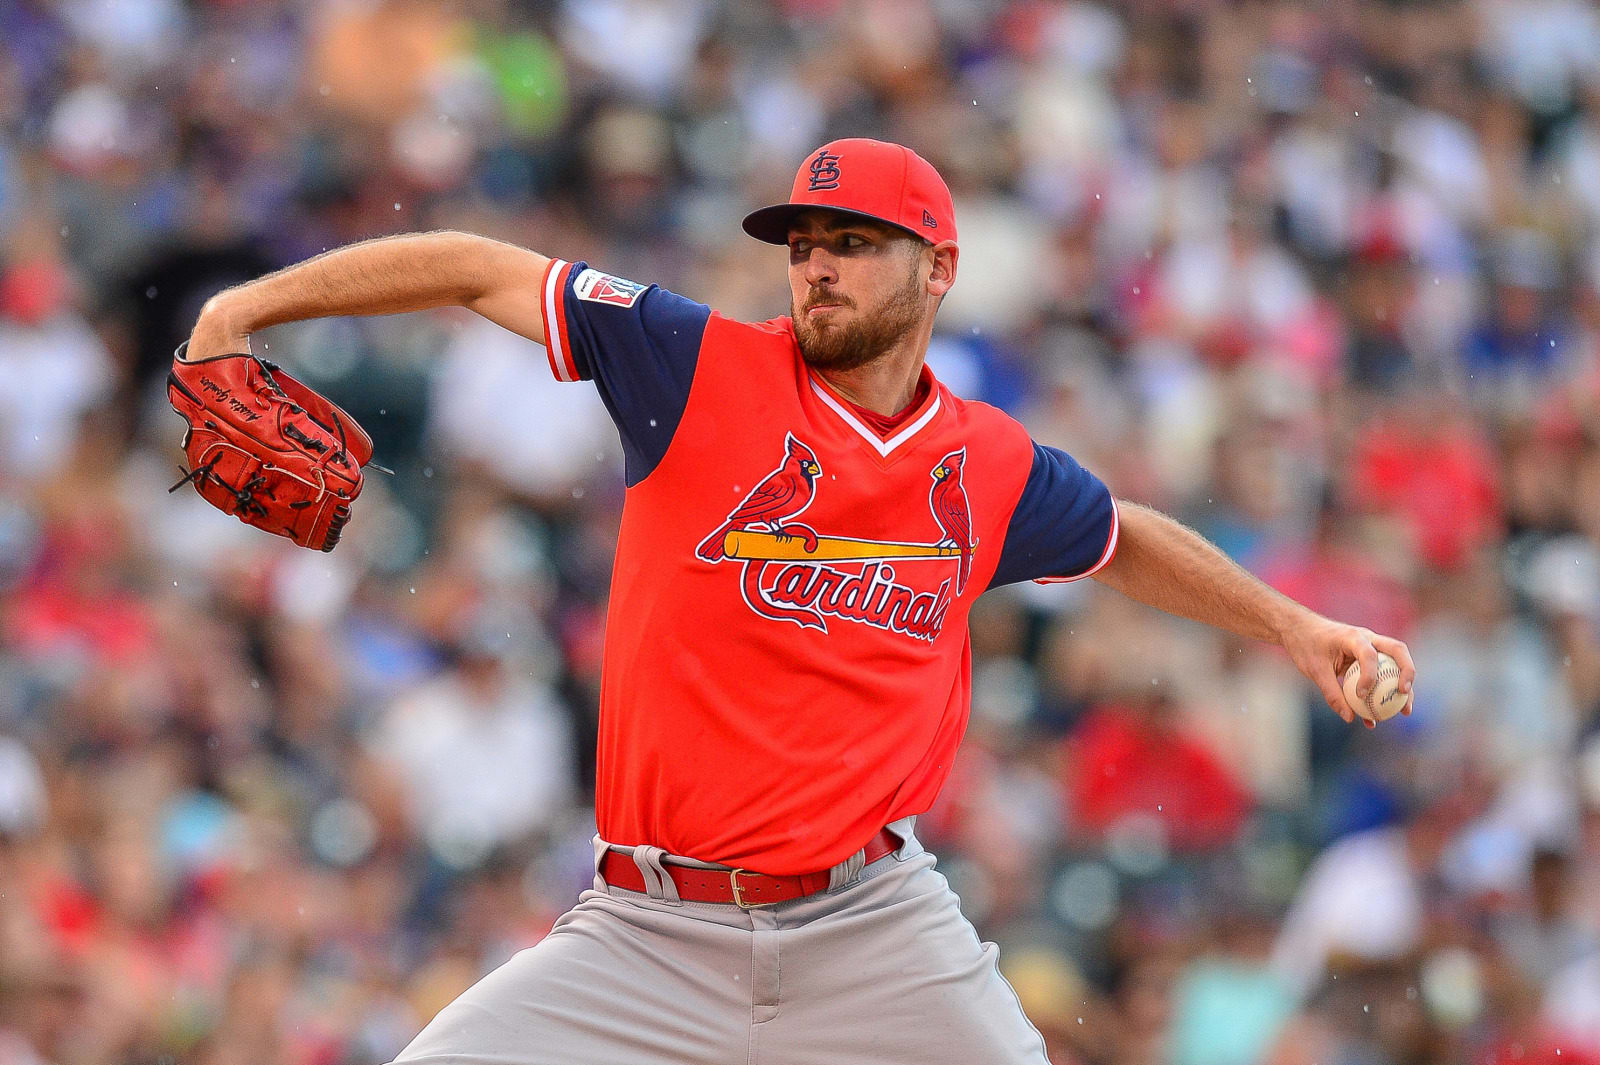 St. Louis Cardinals: A way-too-early look at the 2019 rotation